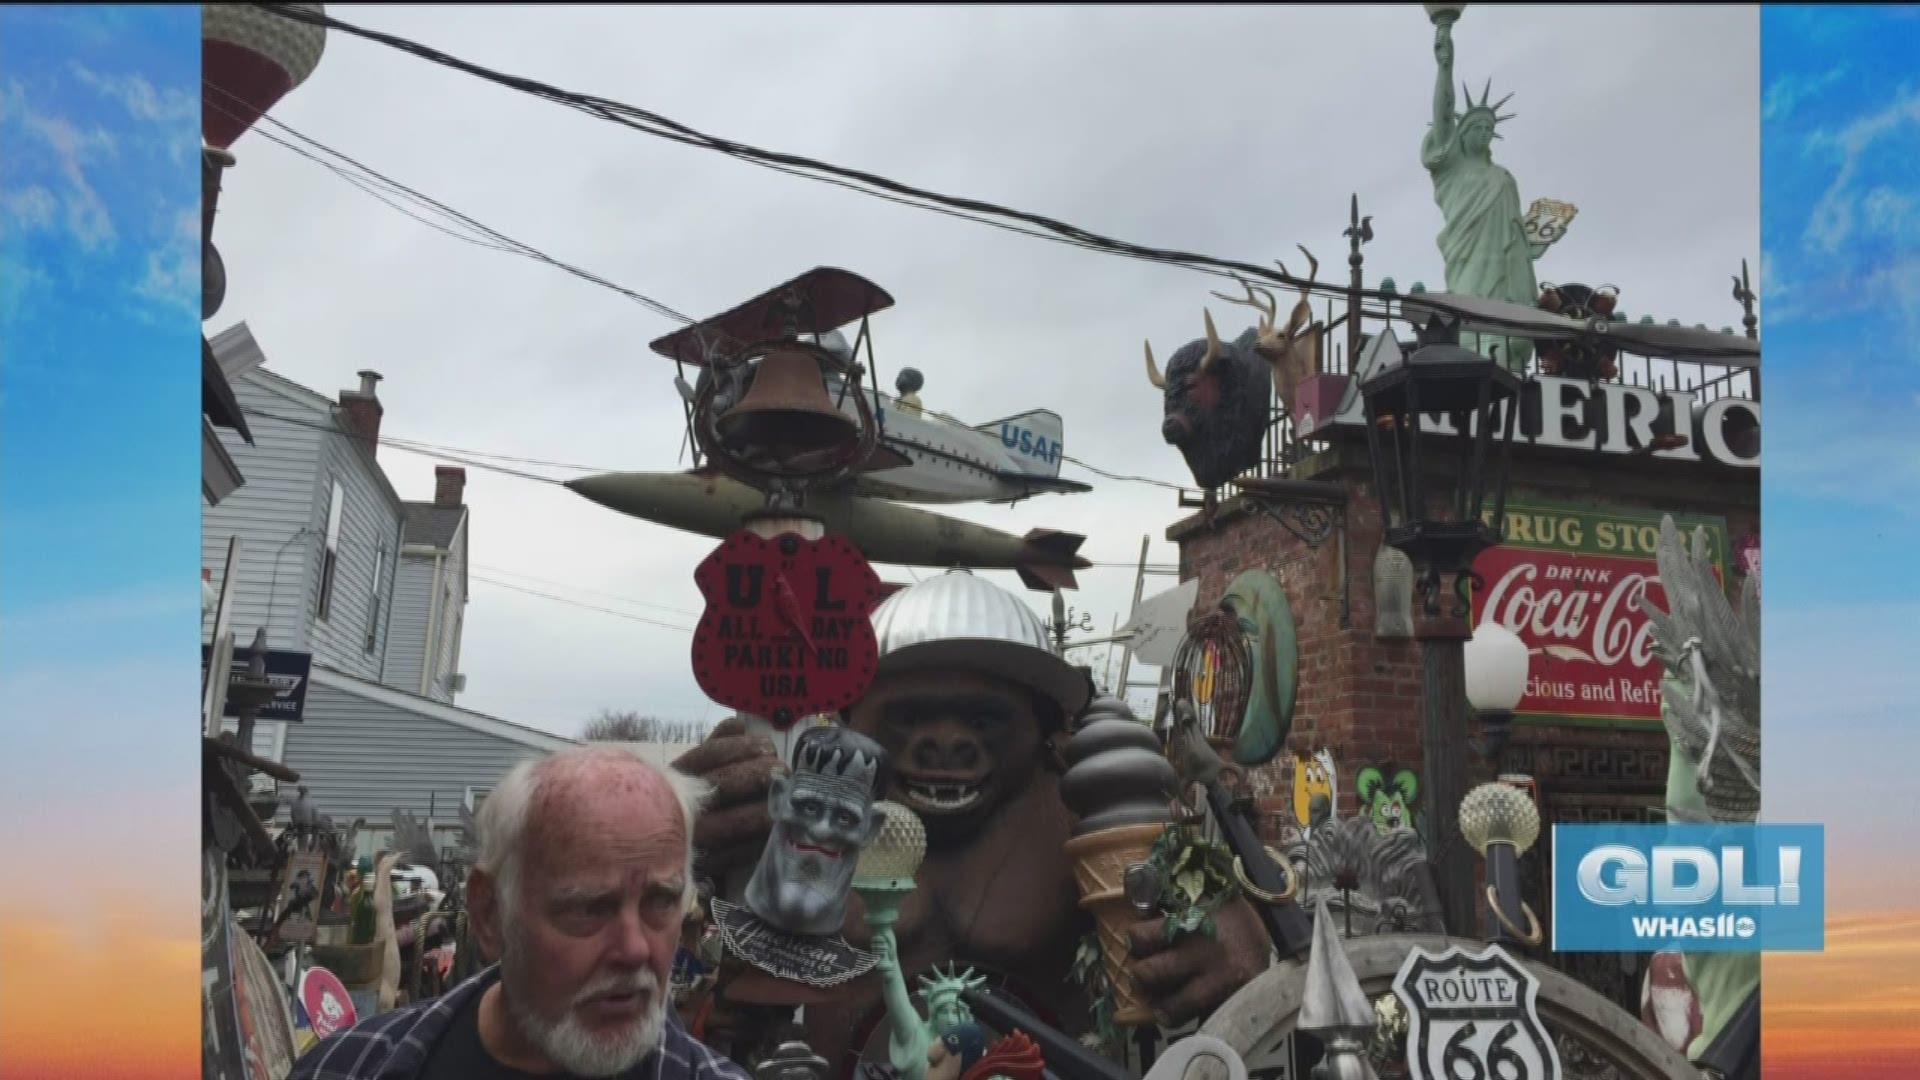 The live auction of "Jerry's Junk" is September 27-28, 2019 at 10 AM at 1700 Mellwood Avenue. Details are at TheLogsdonGroup.com.